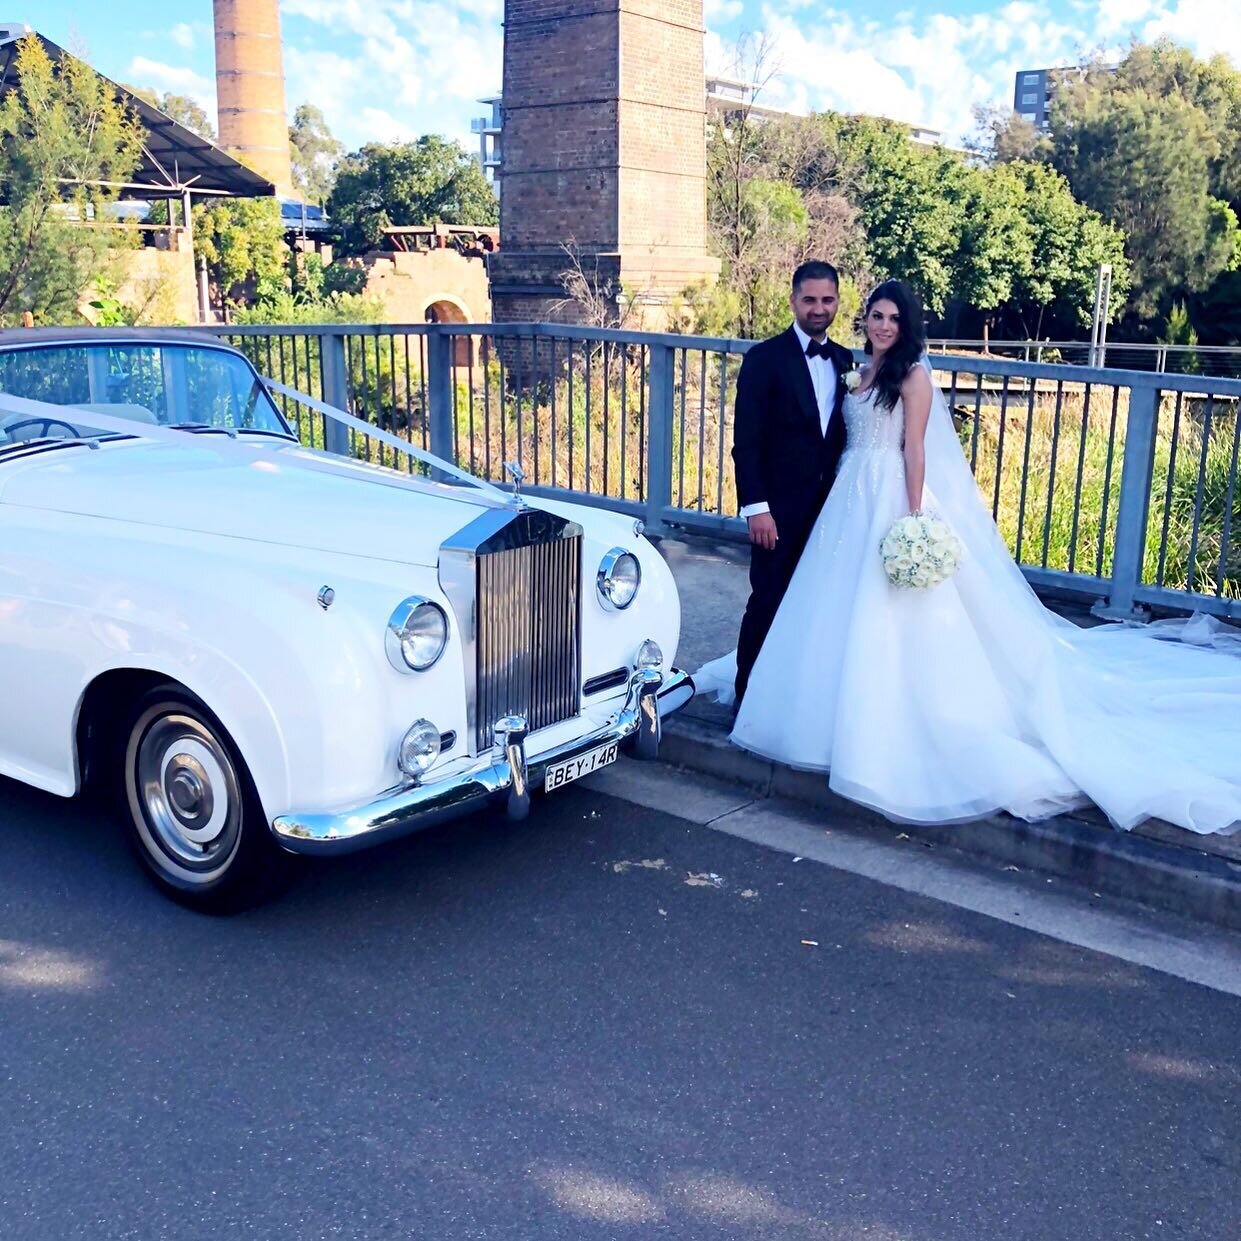 It&rsquo;s their day ... the day their wedding dreams came true 💕 congratulations Pamela &amp; Anthony 💕#wedding #weddingcars #bride #groom #rollsroyce #love #classic #convertible #rollupinarolls